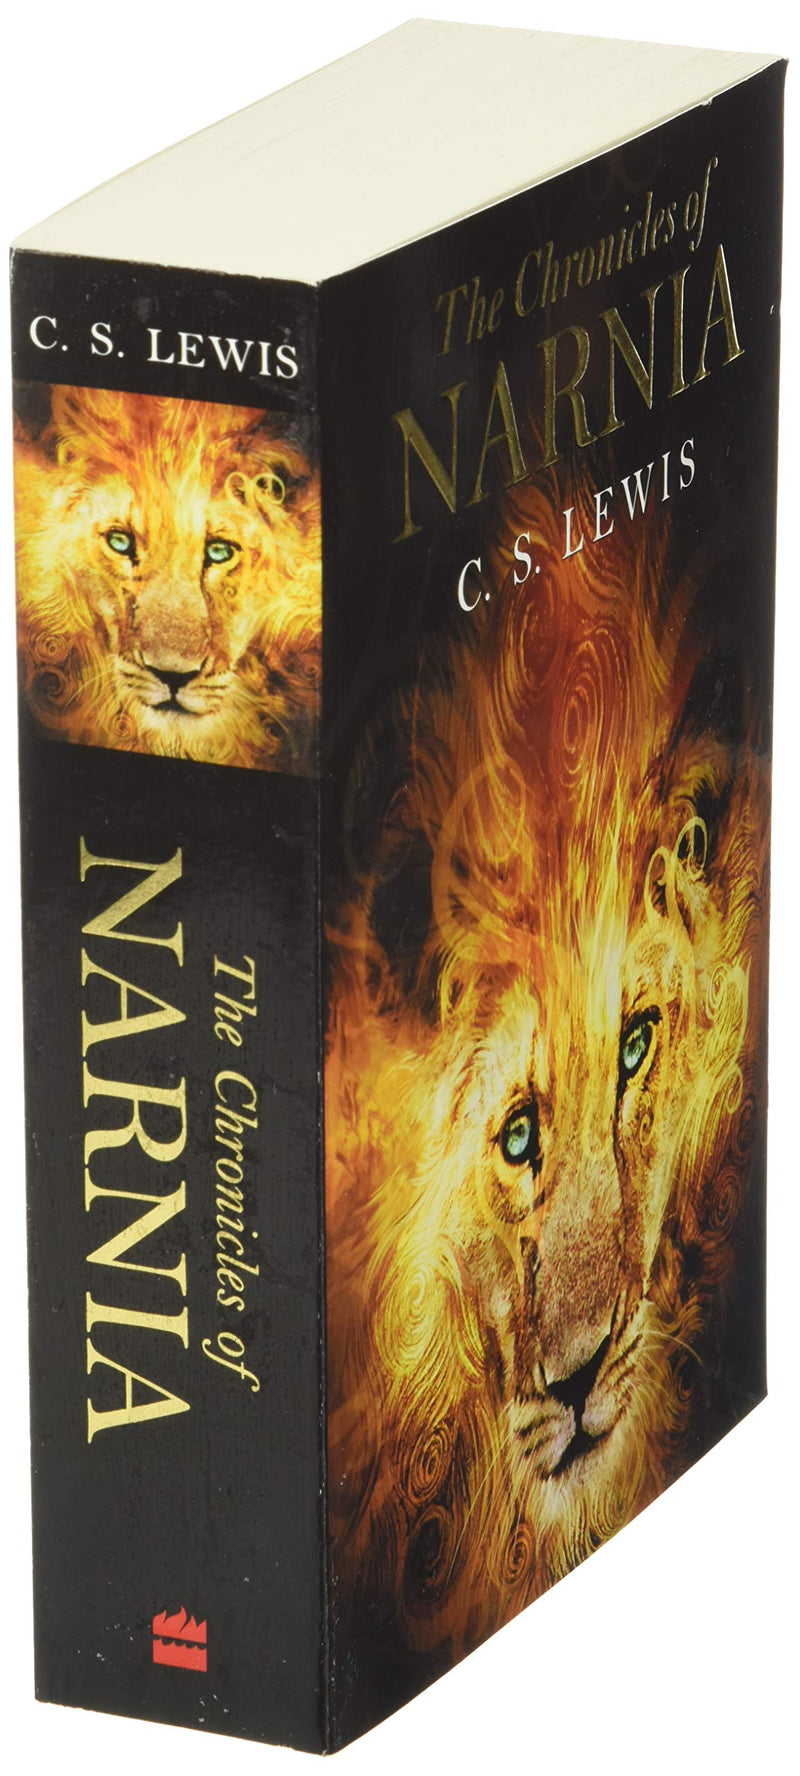 Books　Chronicles　Narnia:　of　The　in